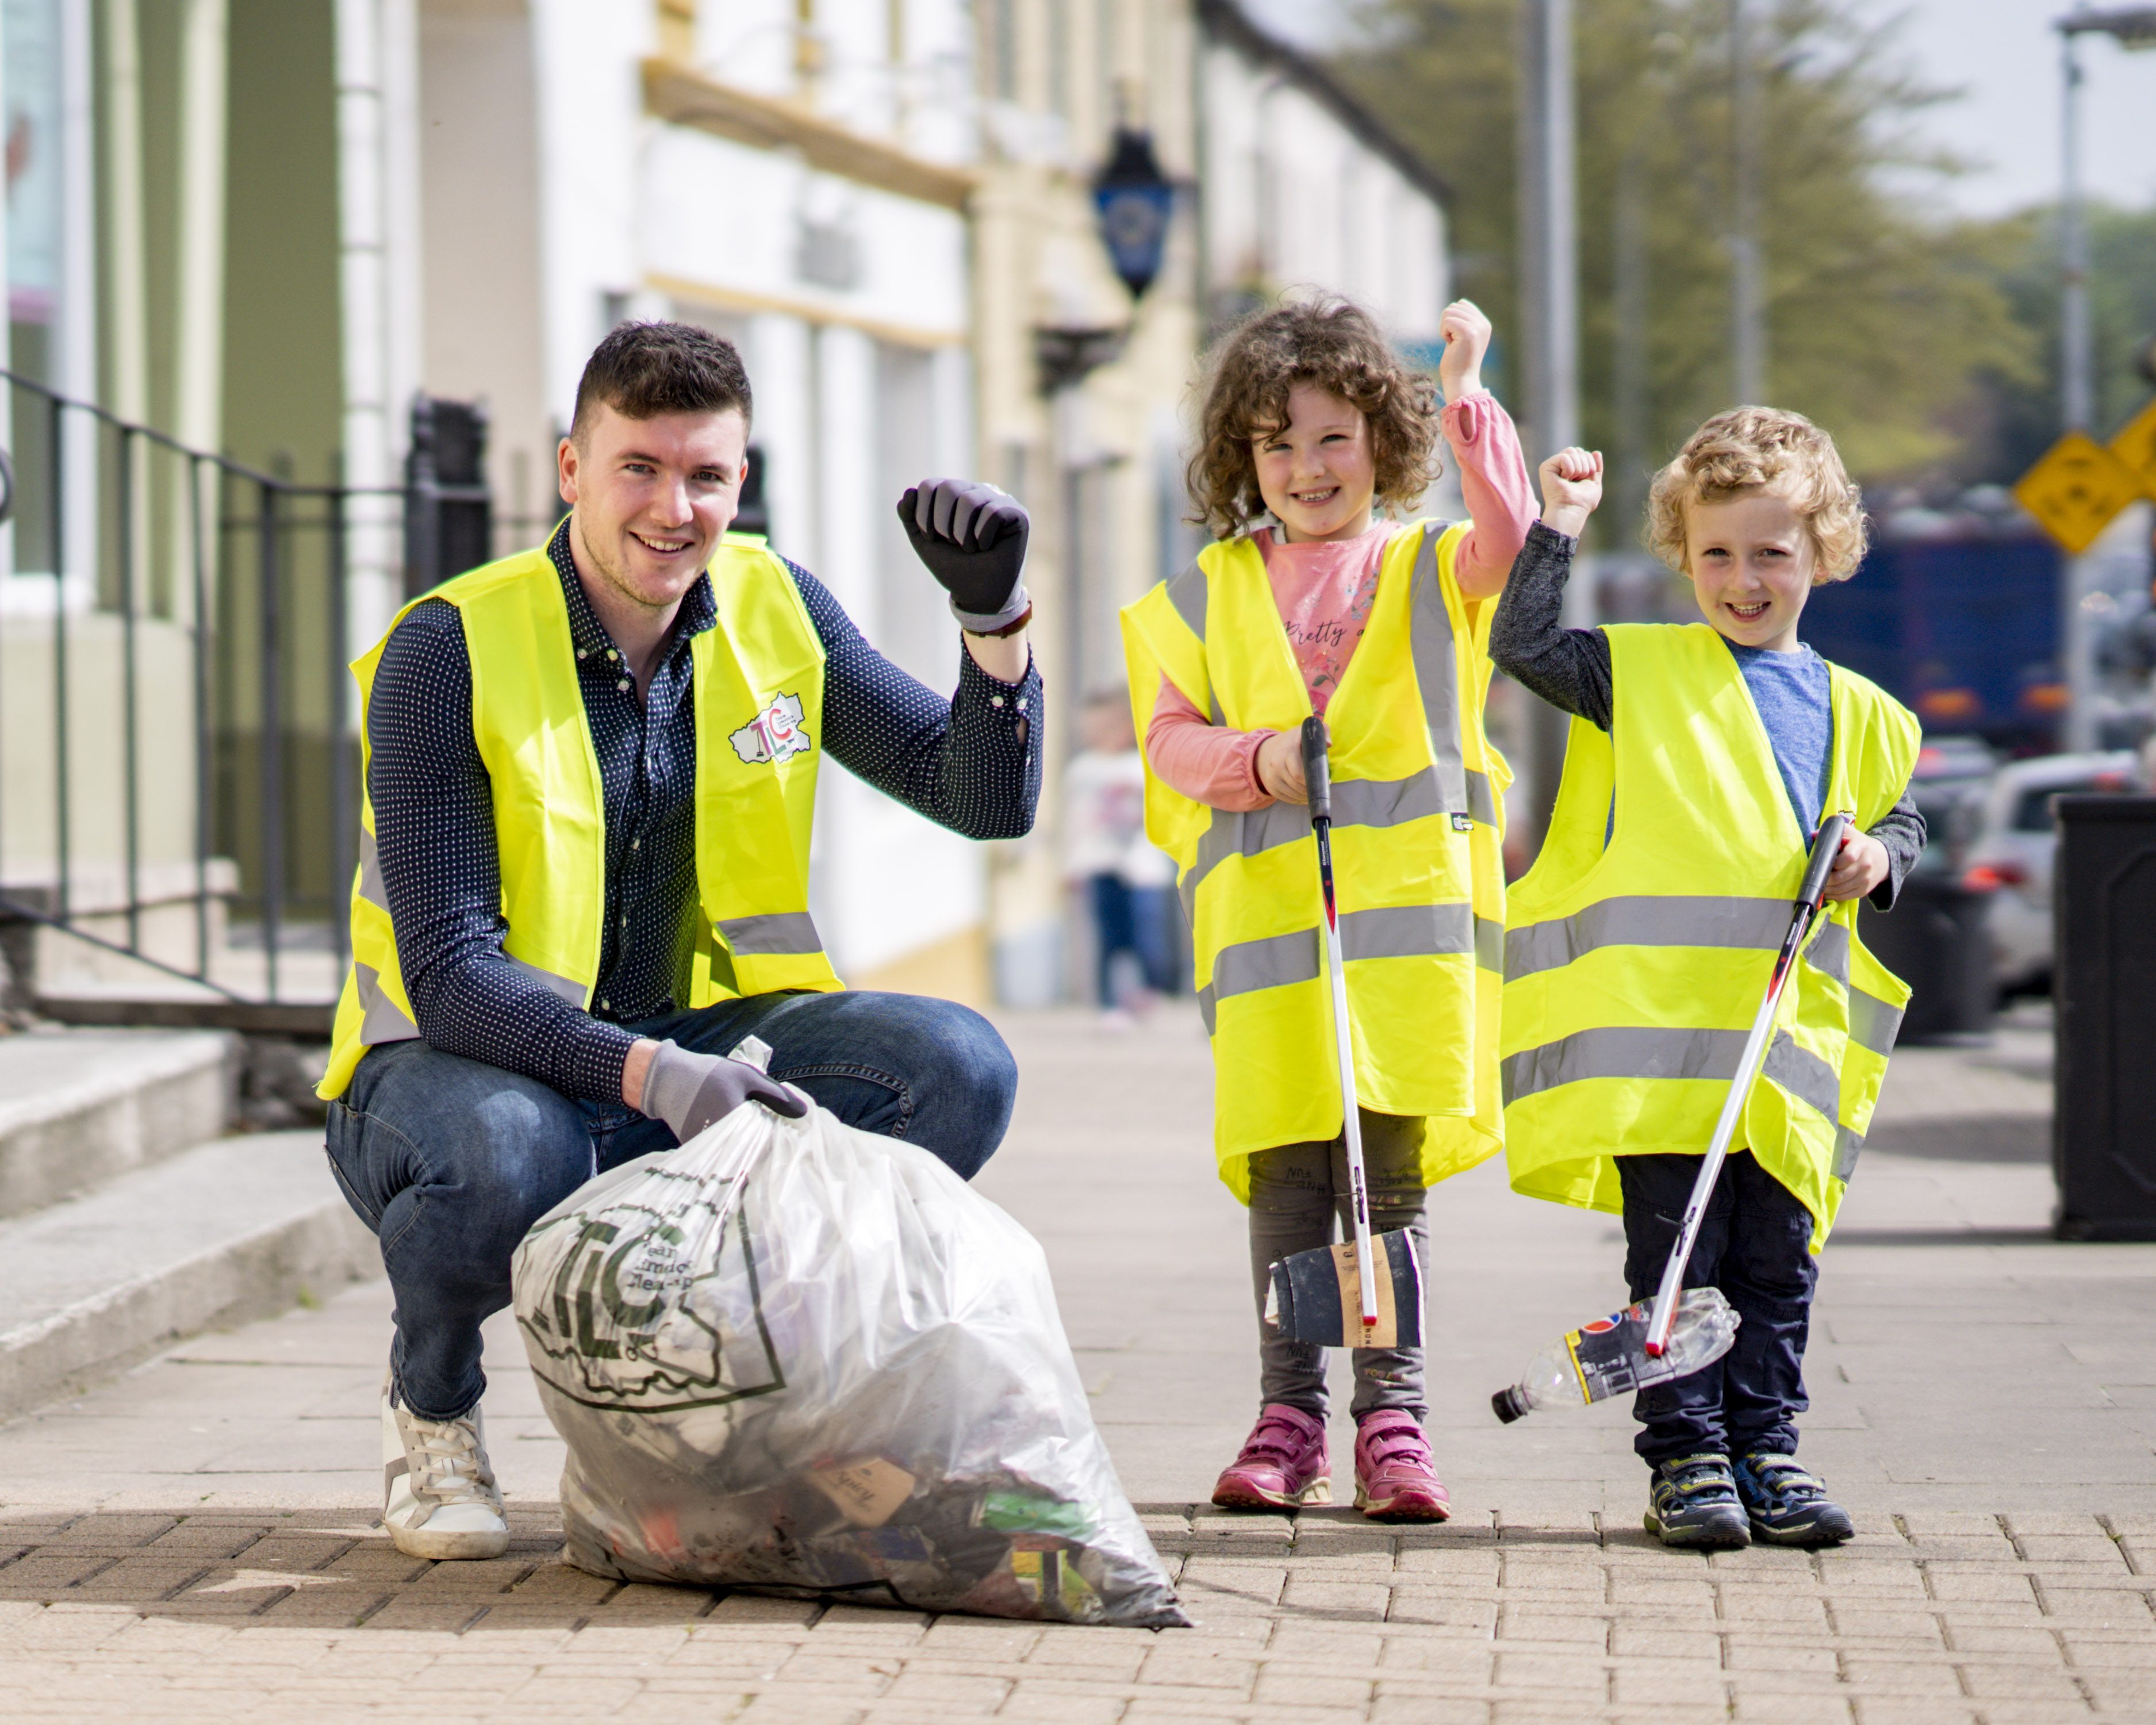 19/04/2019Limerick Hurling Captain, Declan Hannon pictured with Lillie and Joe Kennedy from Adare at The Team Limerick Clean-Up (TLC) in Limerick. Pic: Don Moloney